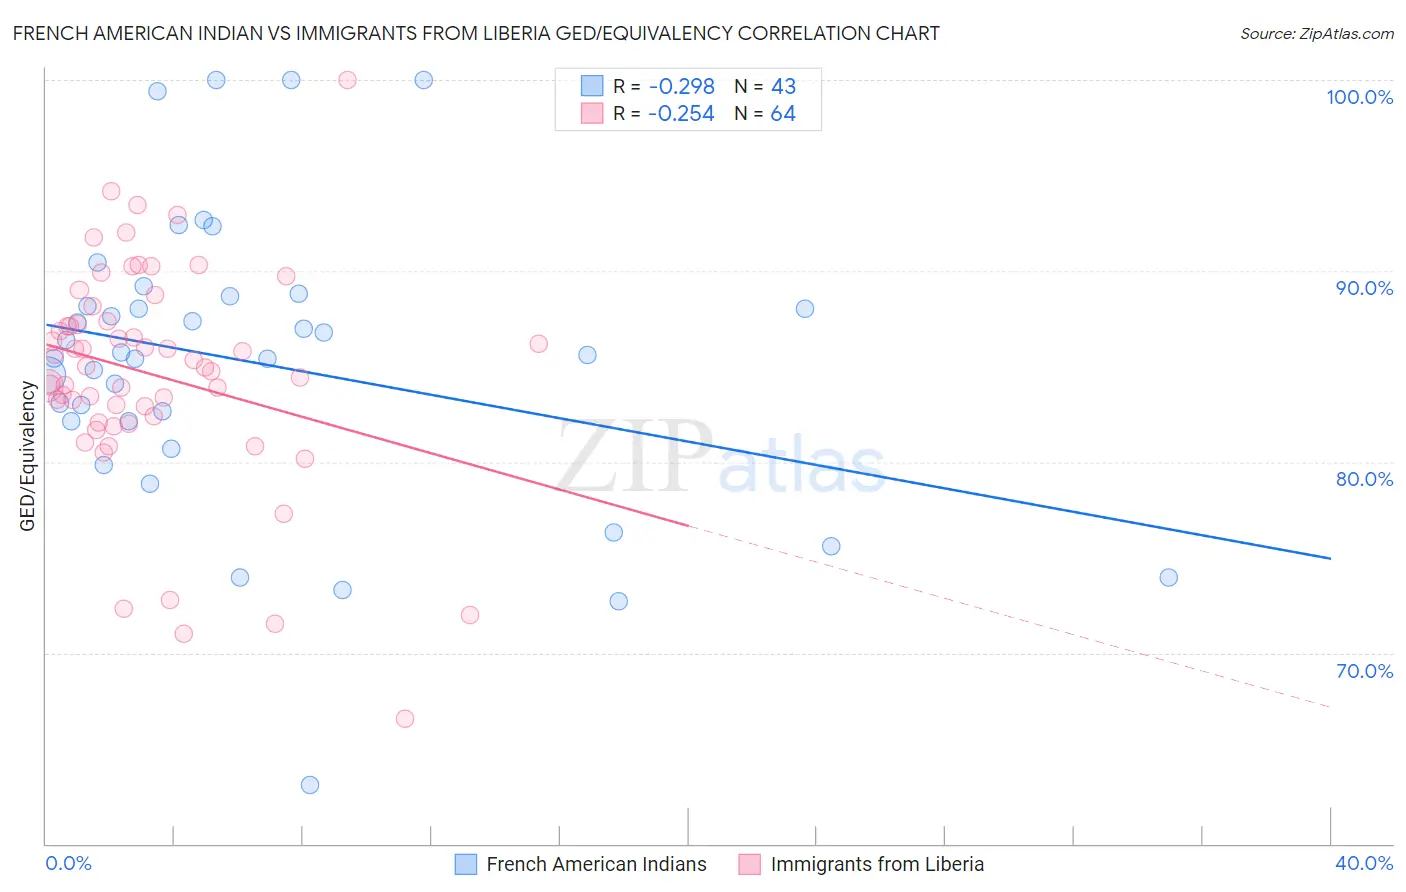 French American Indian vs Immigrants from Liberia GED/Equivalency